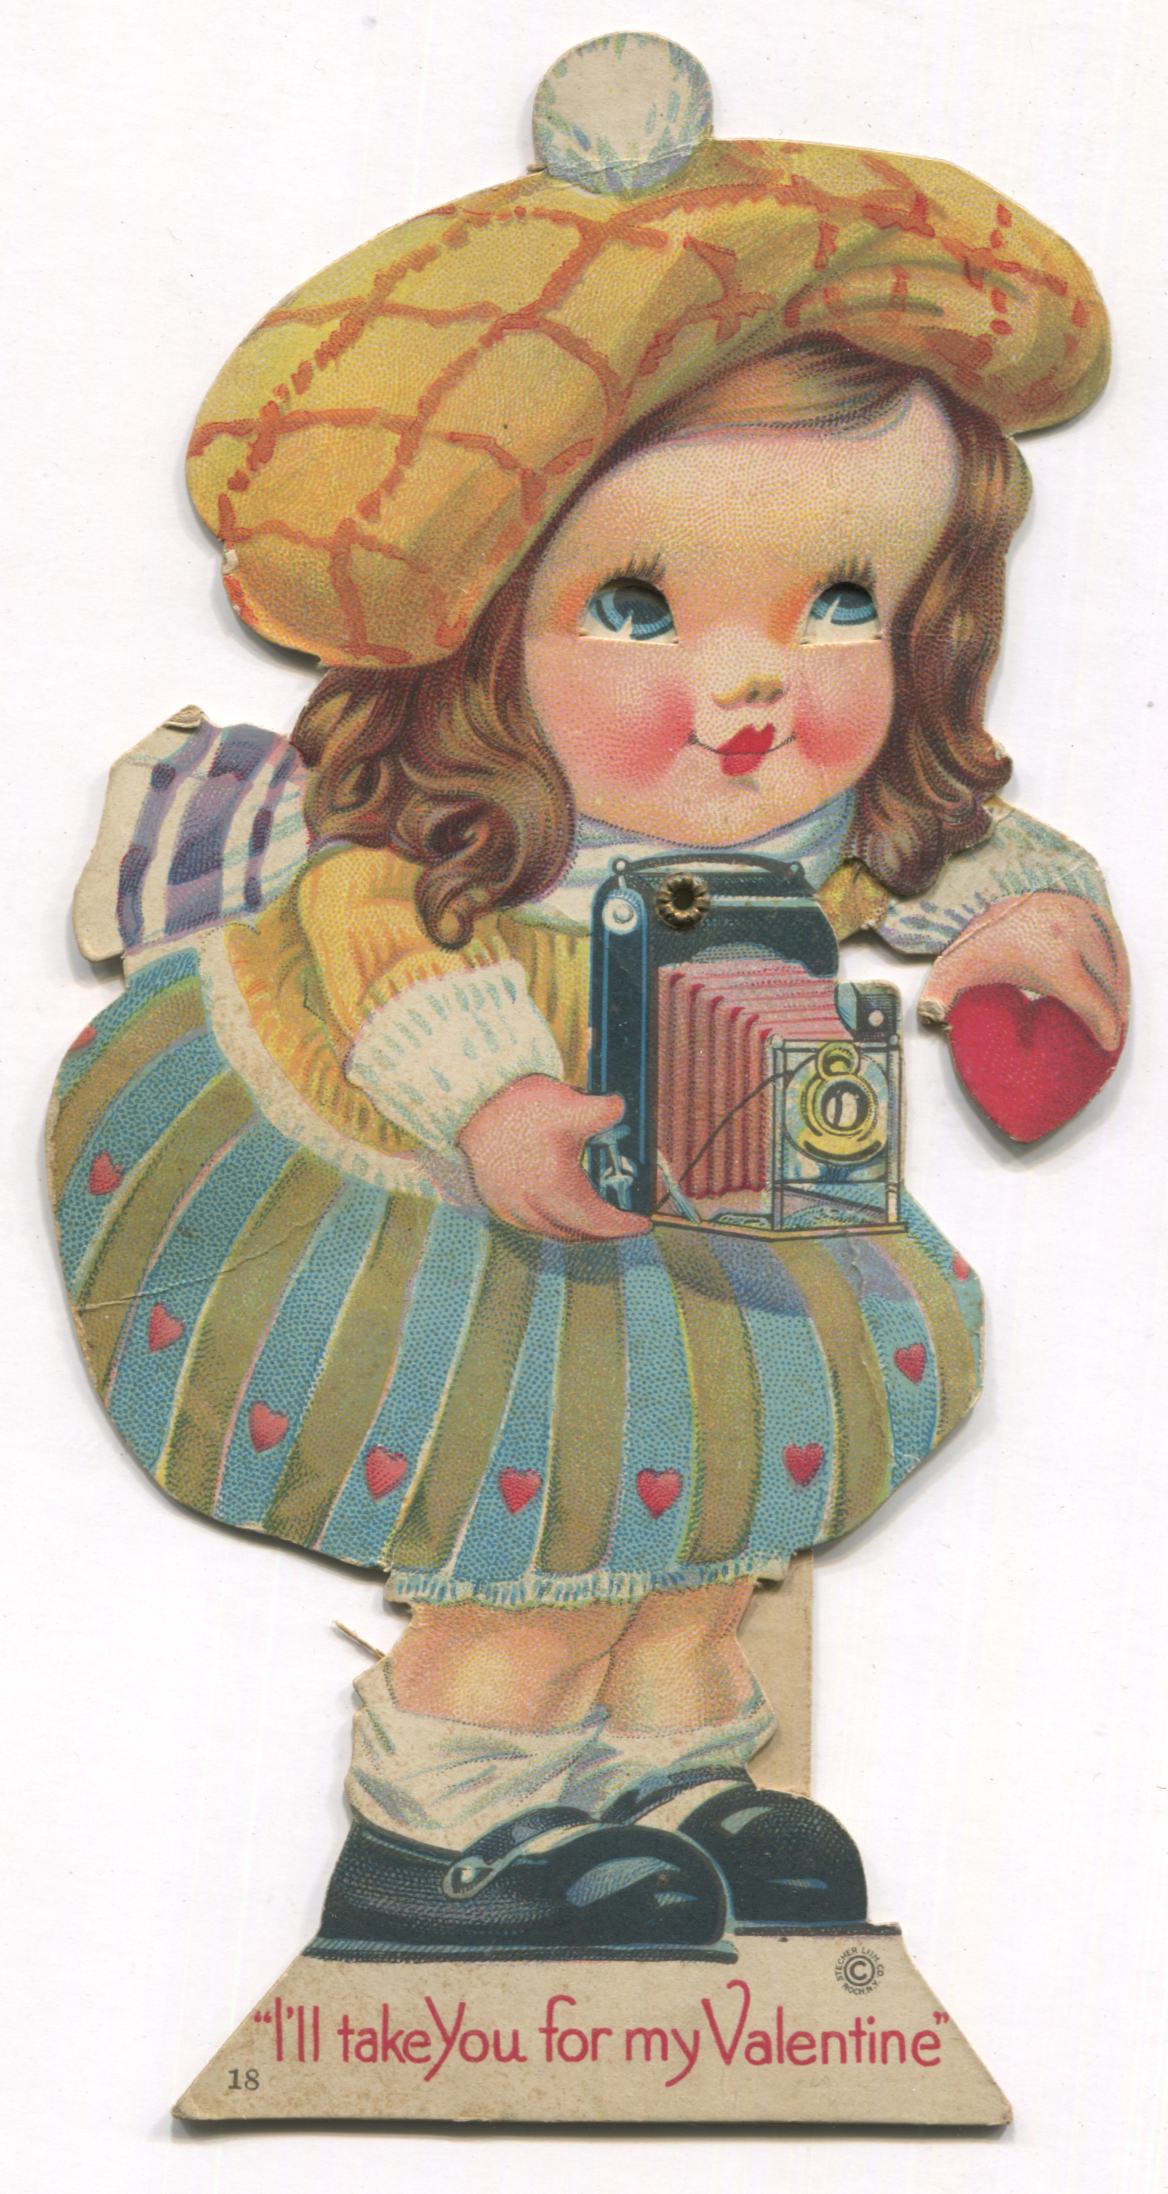 Die Cut Posable Antique Valentine Greeting Card - "I'll Take You For My Valentine" - 3.5" x 7"